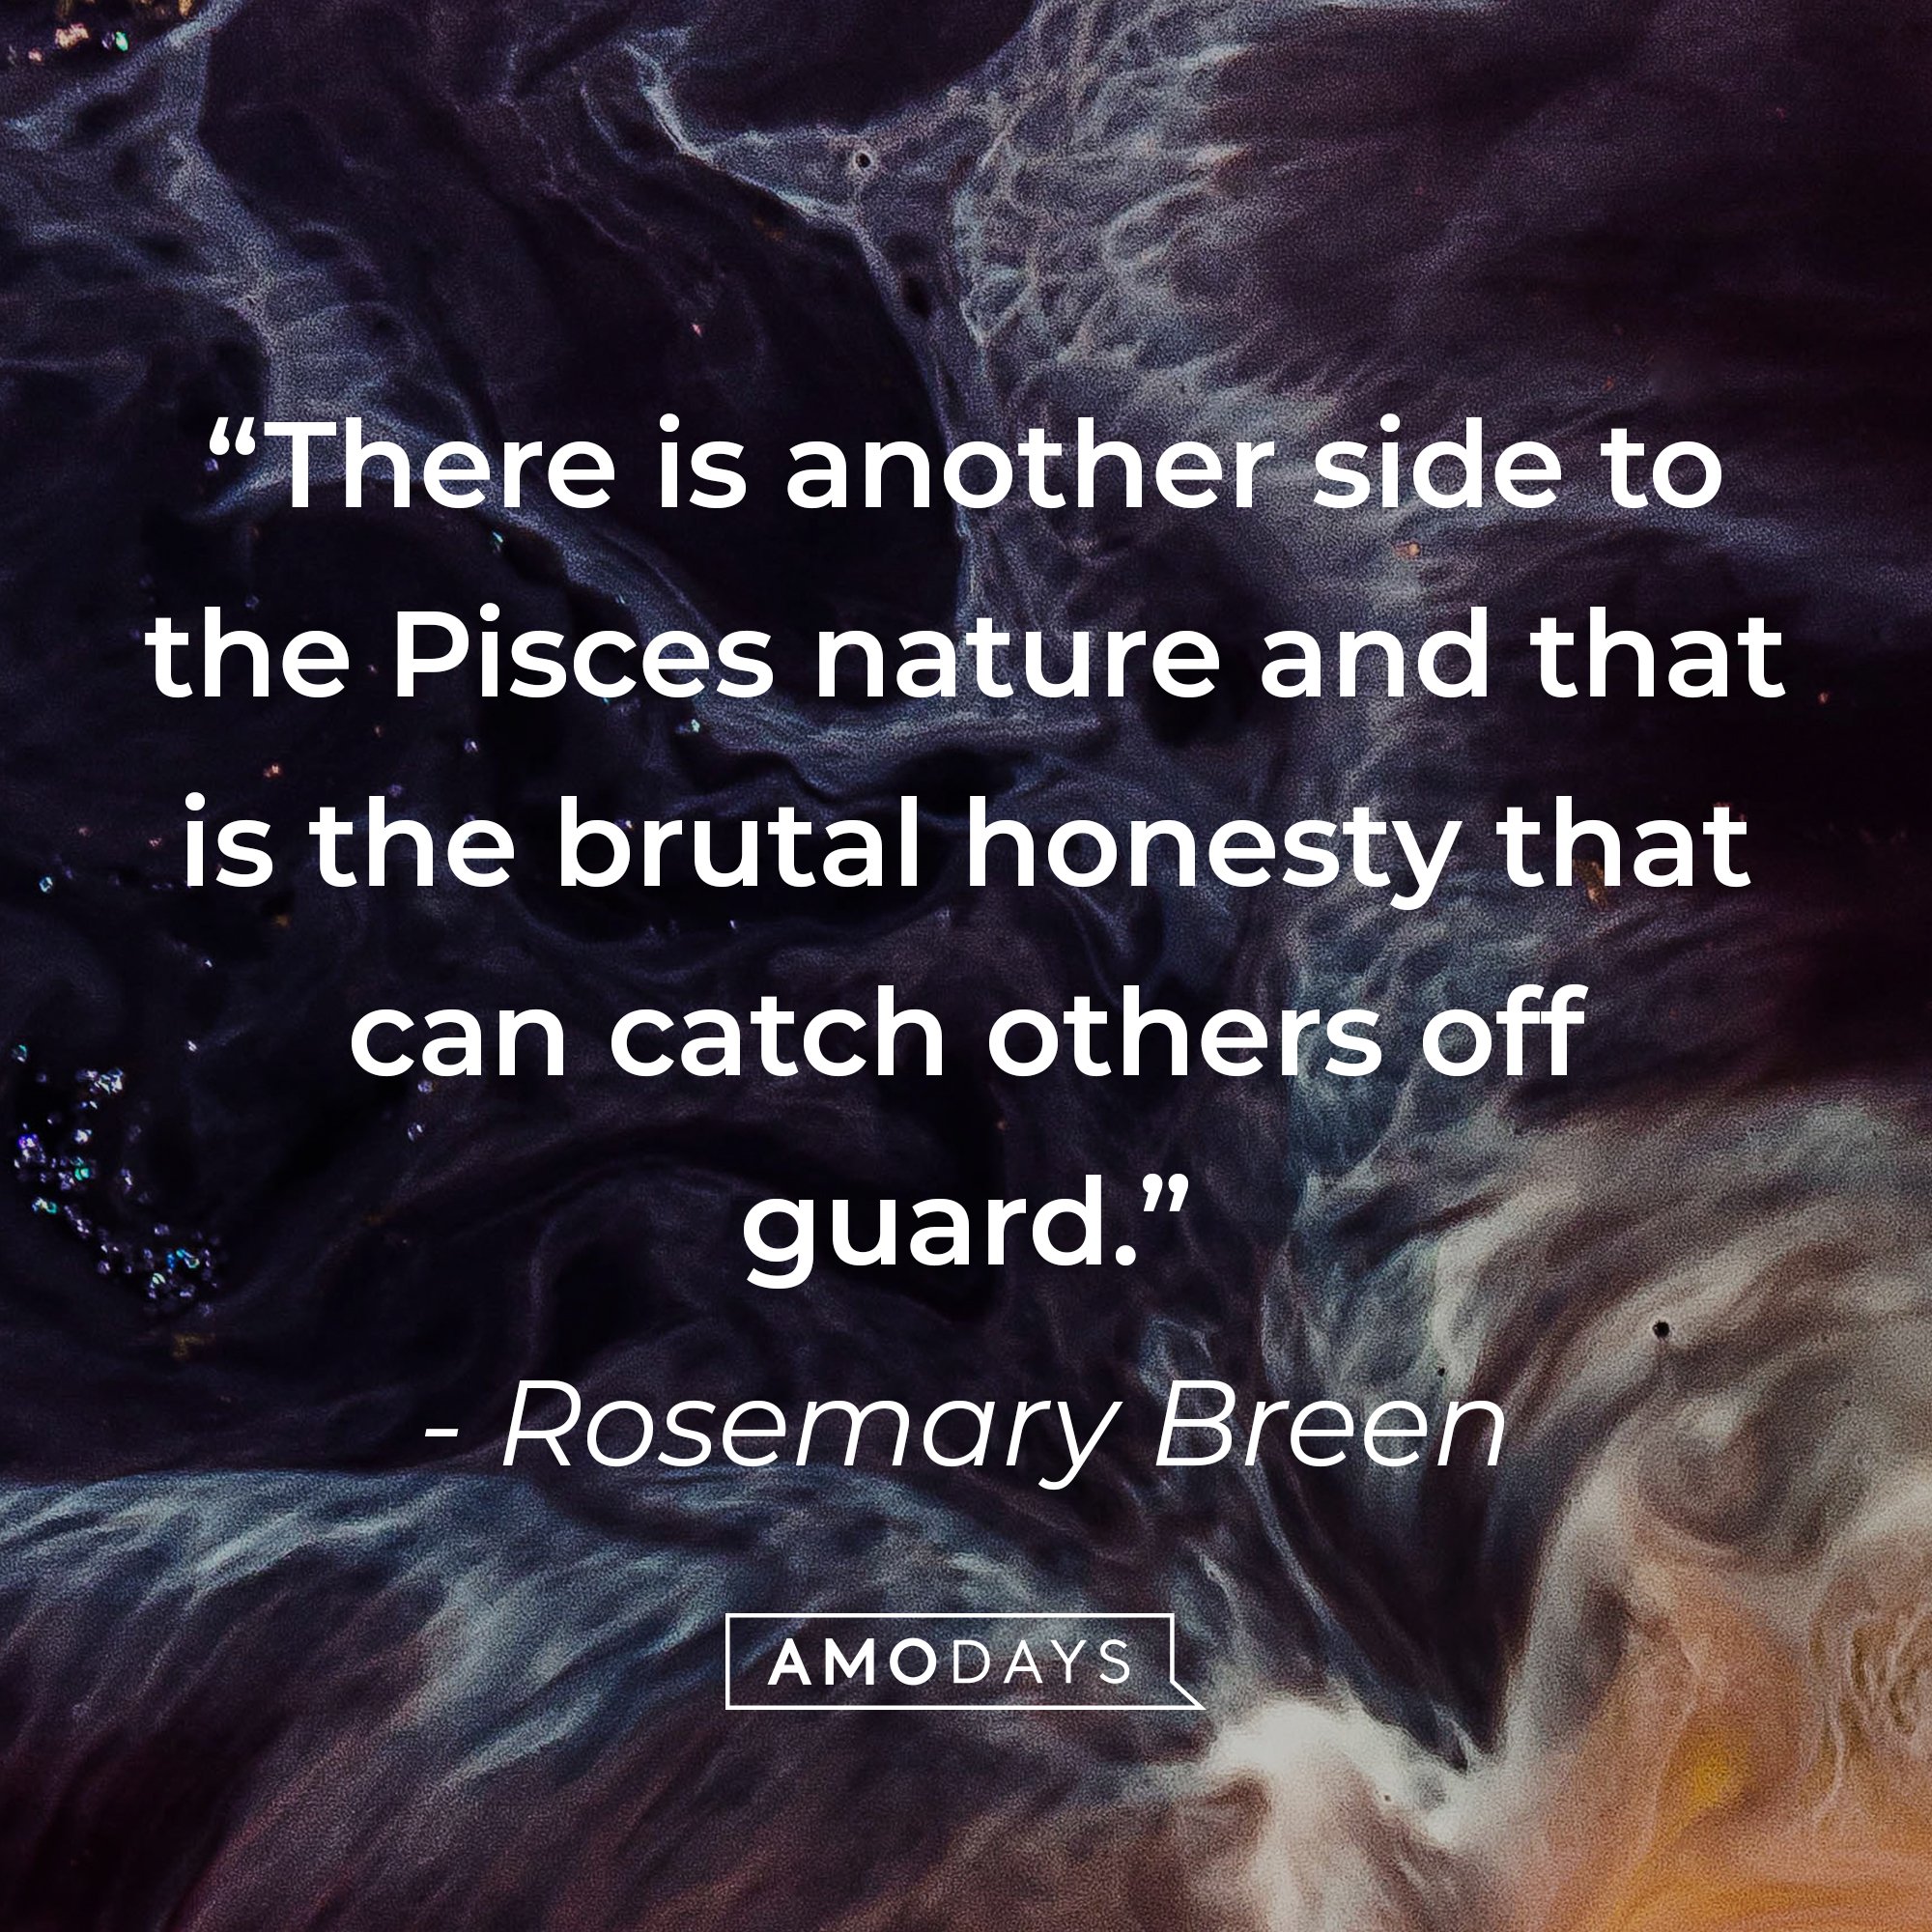 Rosemary Breen's quote: "There is another side to the Pisces nature and that is the brutal honesty that can catch others off guard." | Image: AmoDays